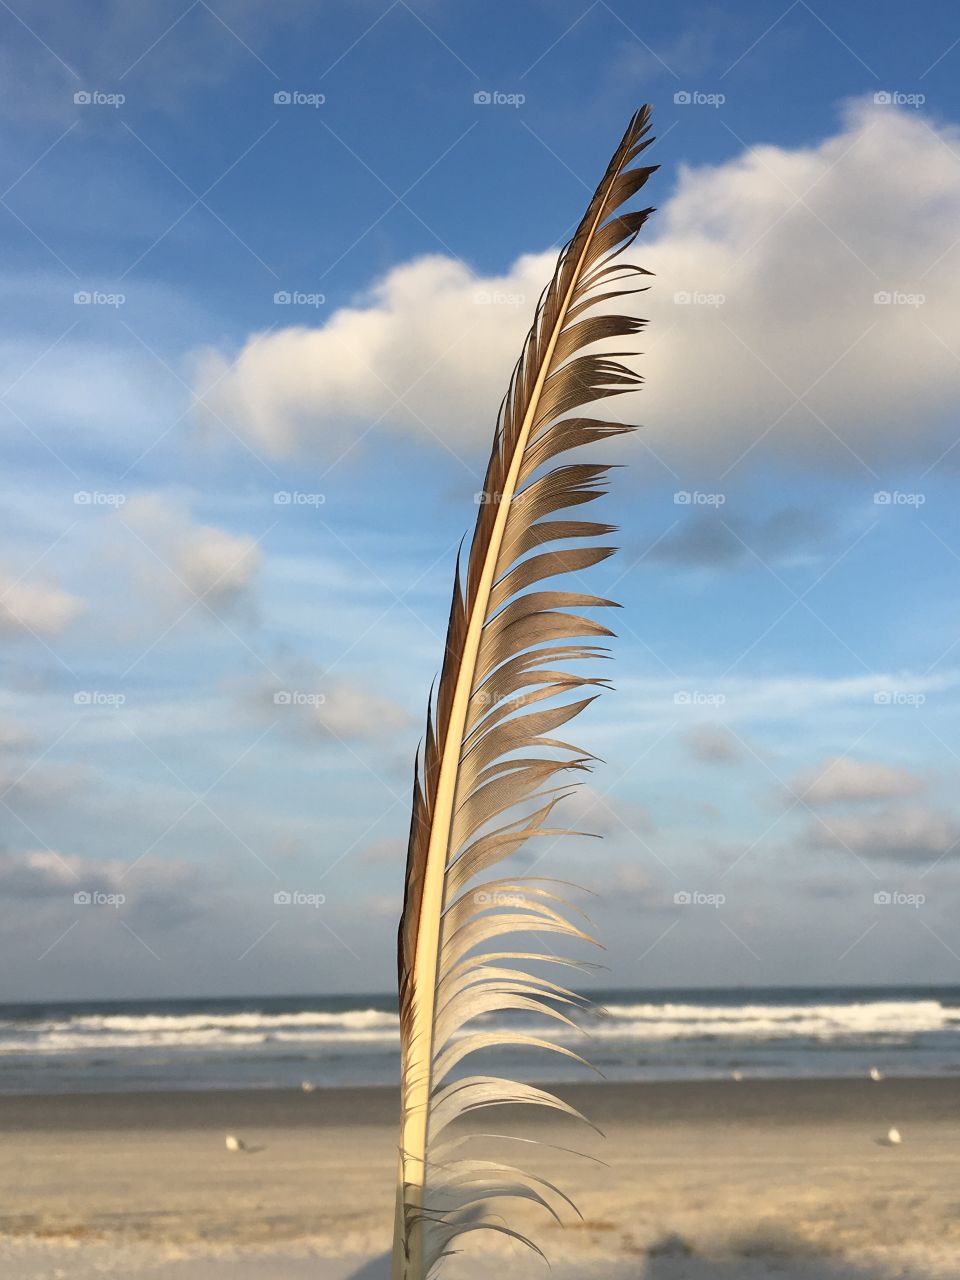 Feather sticking up with a beach background 